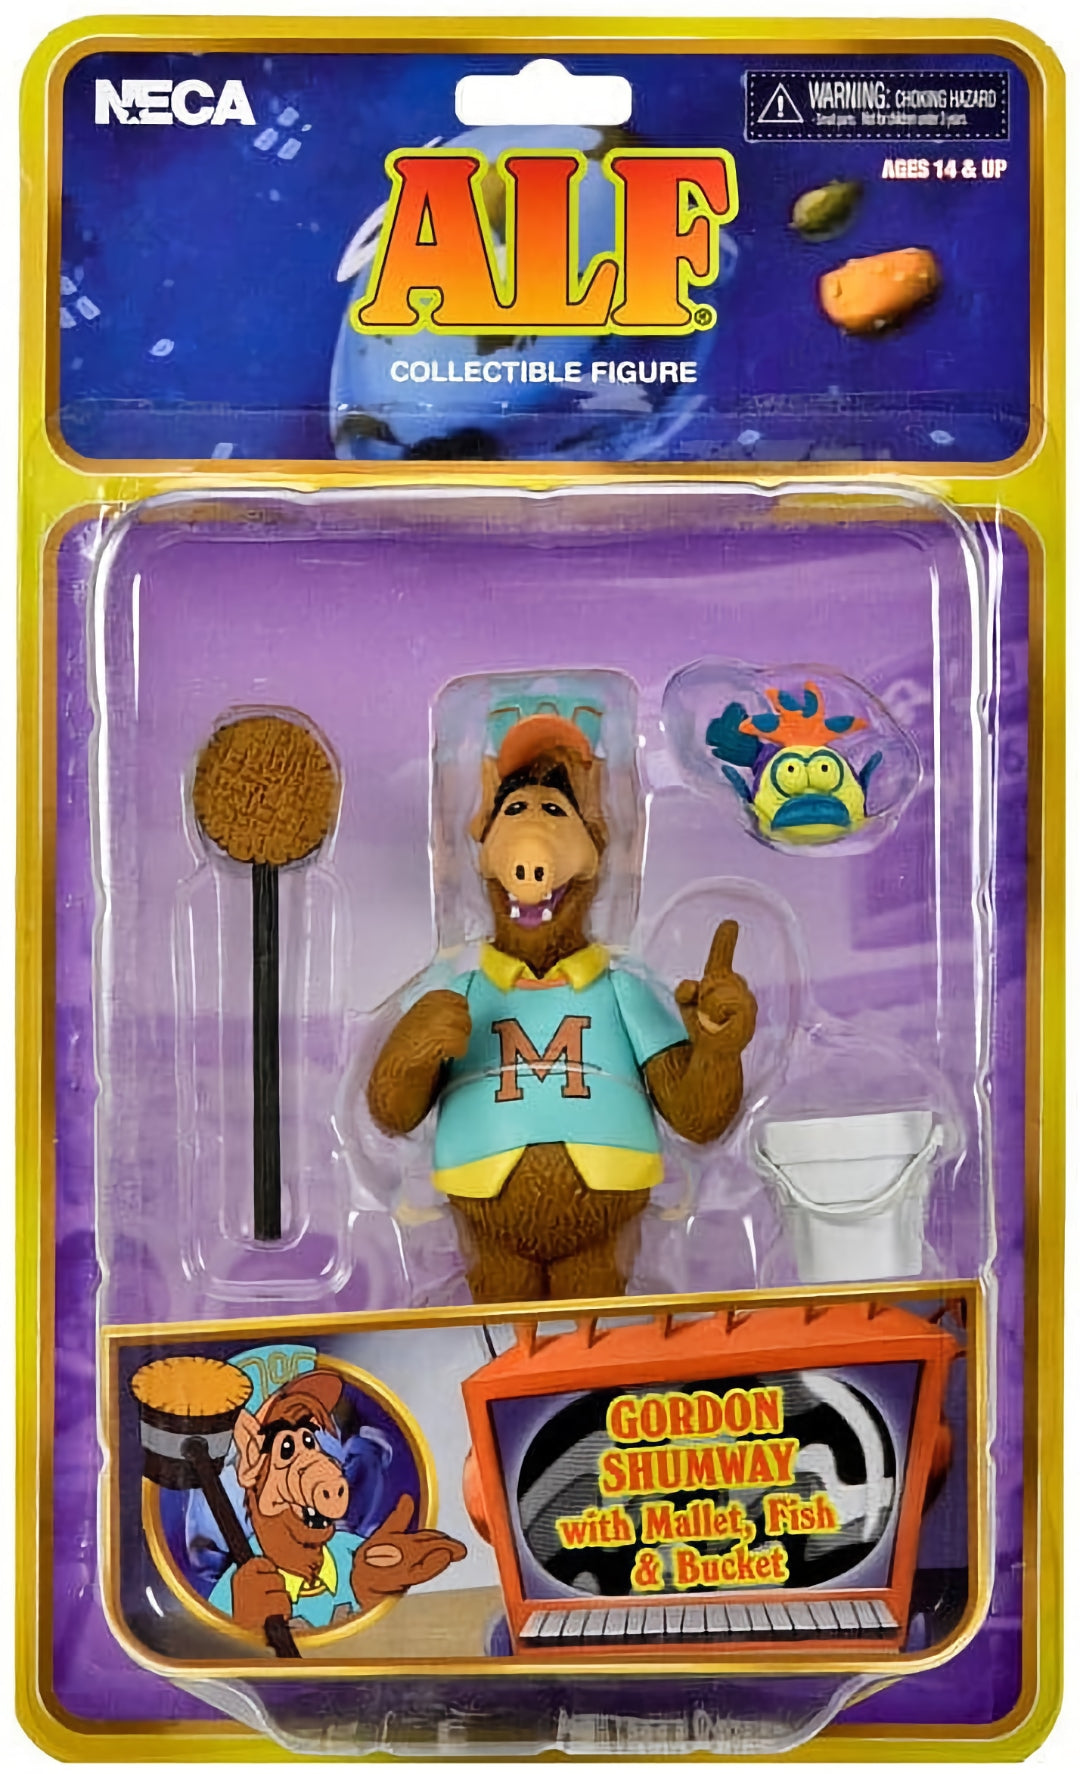 Neca - ALF - Action Figure - Gordon Shumway with Mallet, Fish and Bucket (15 cm)